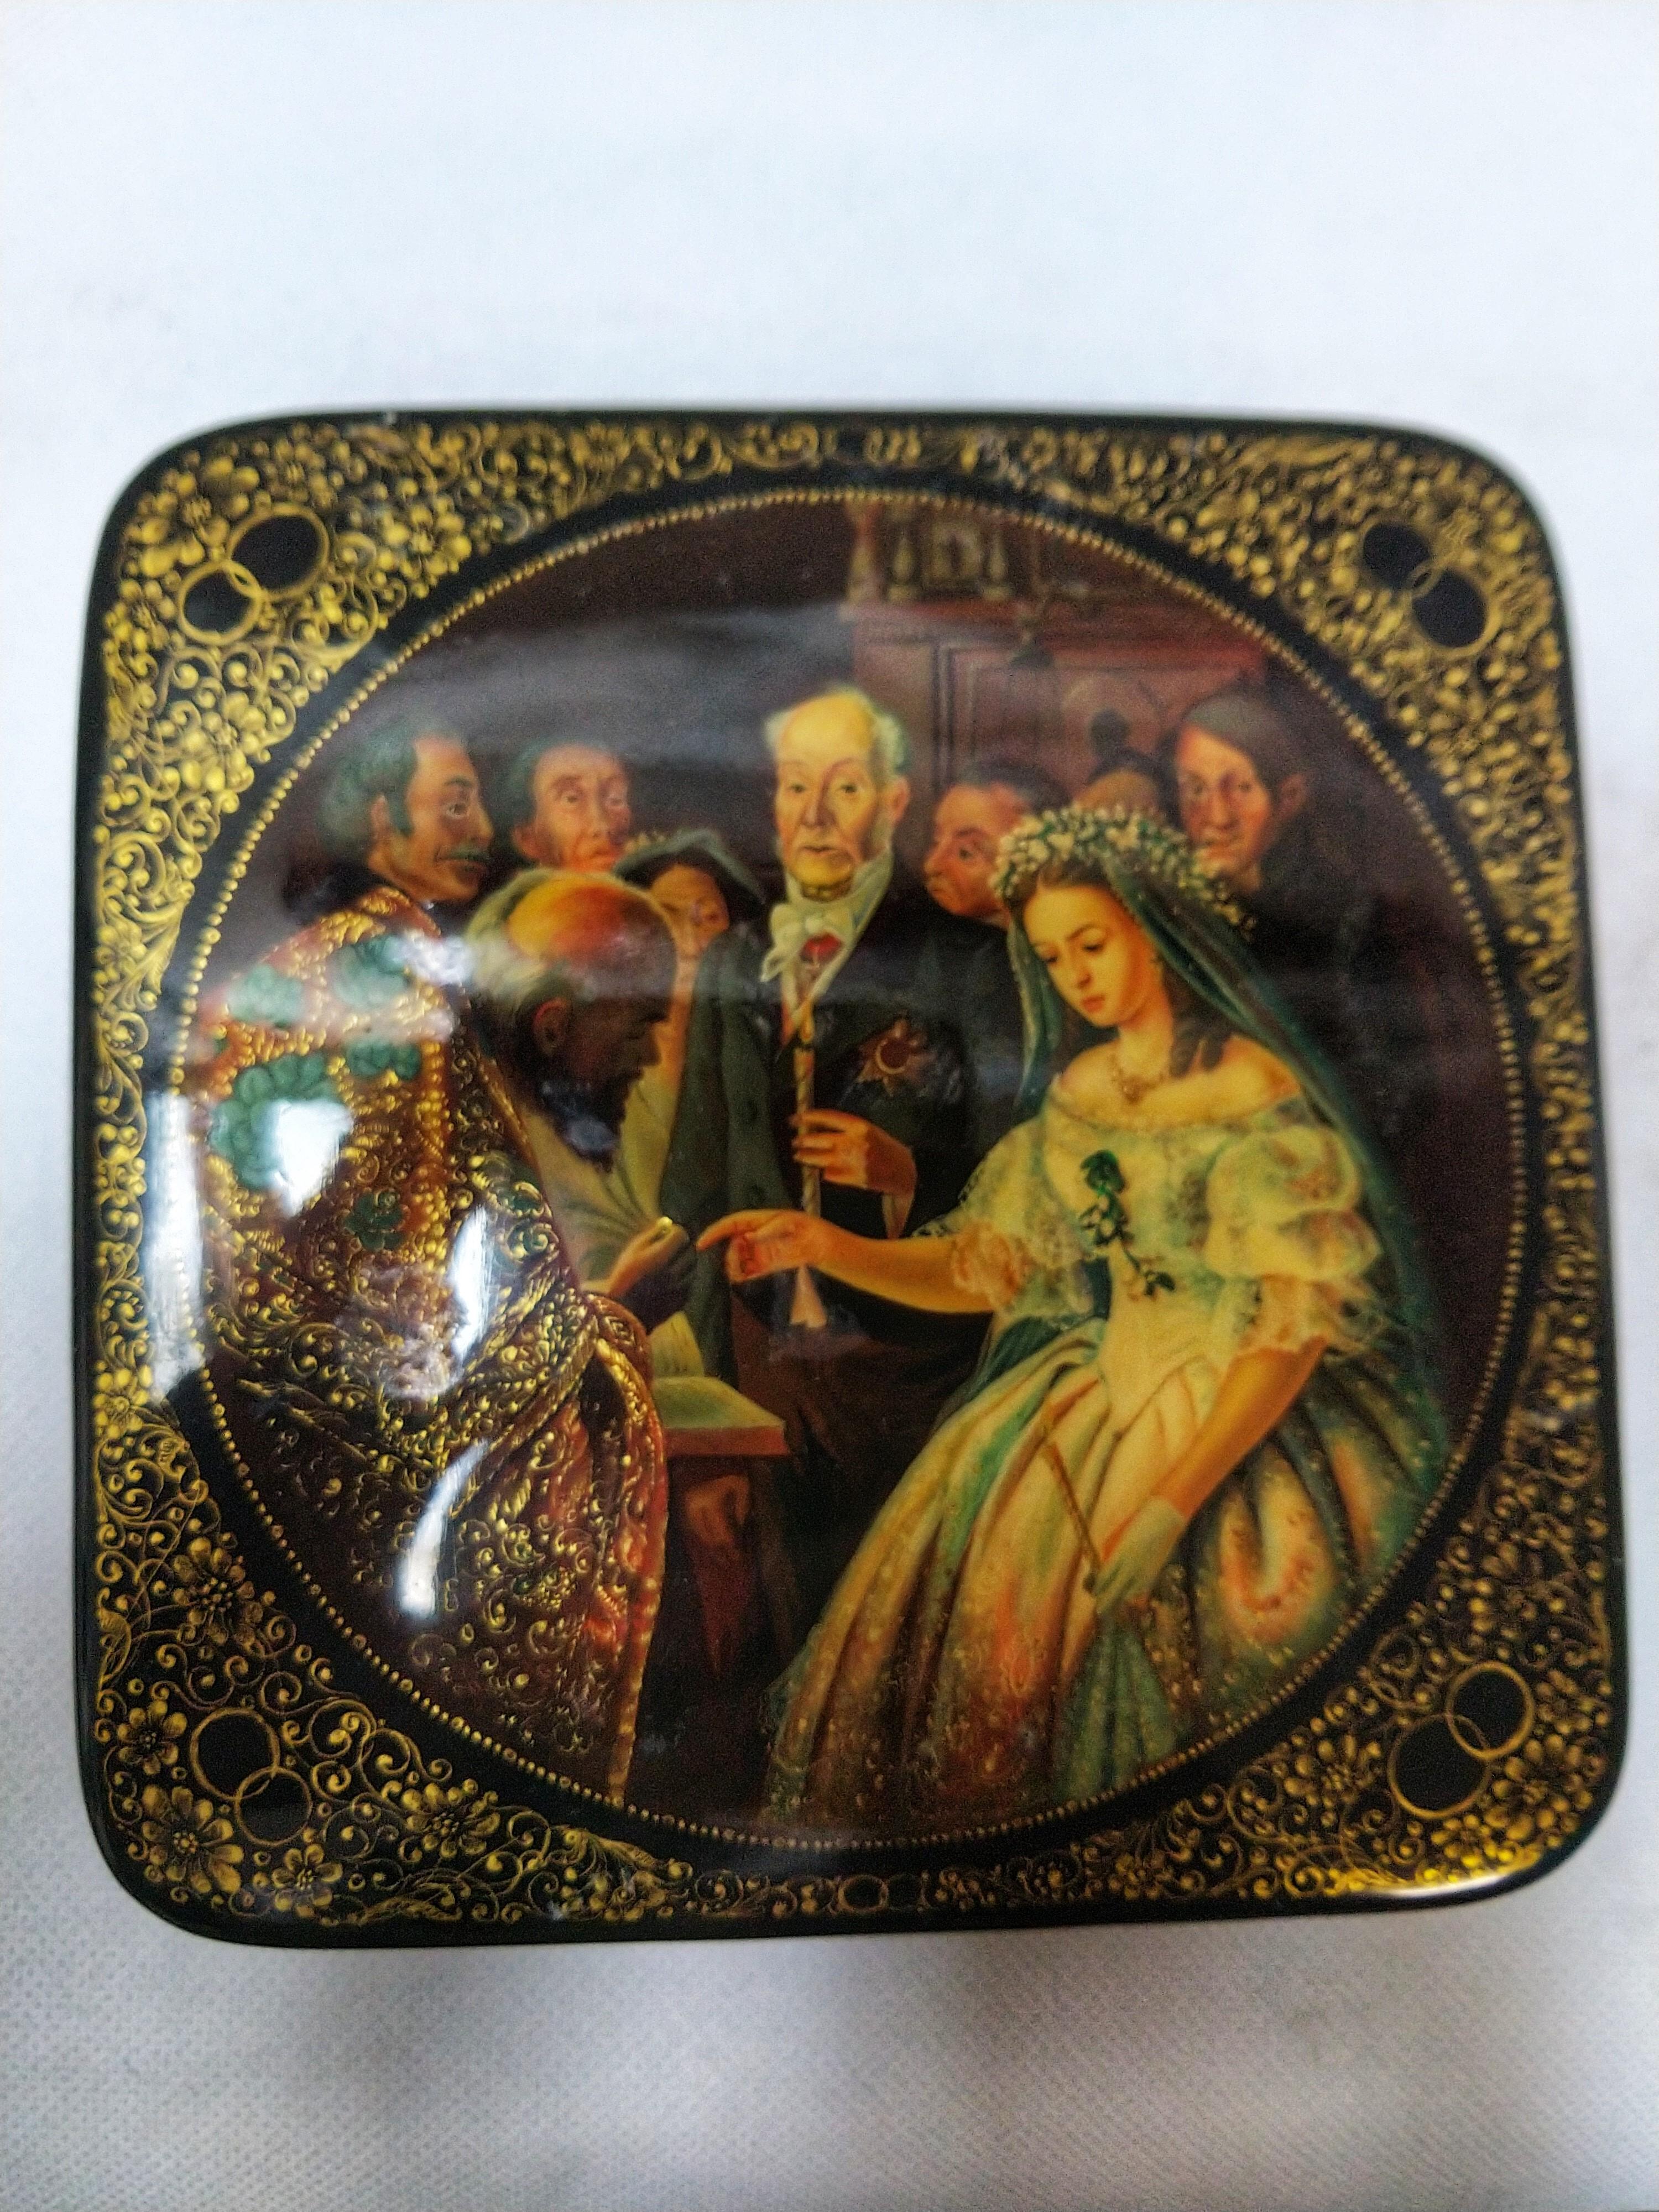 Exceptional lacquered and hand-painted Russian box. 
The painting depicts a sad young woman (probably due to a forced marriage with an older man). Note the fabulous colors.

These hand-painted miniatures have an ancient and multi-secular